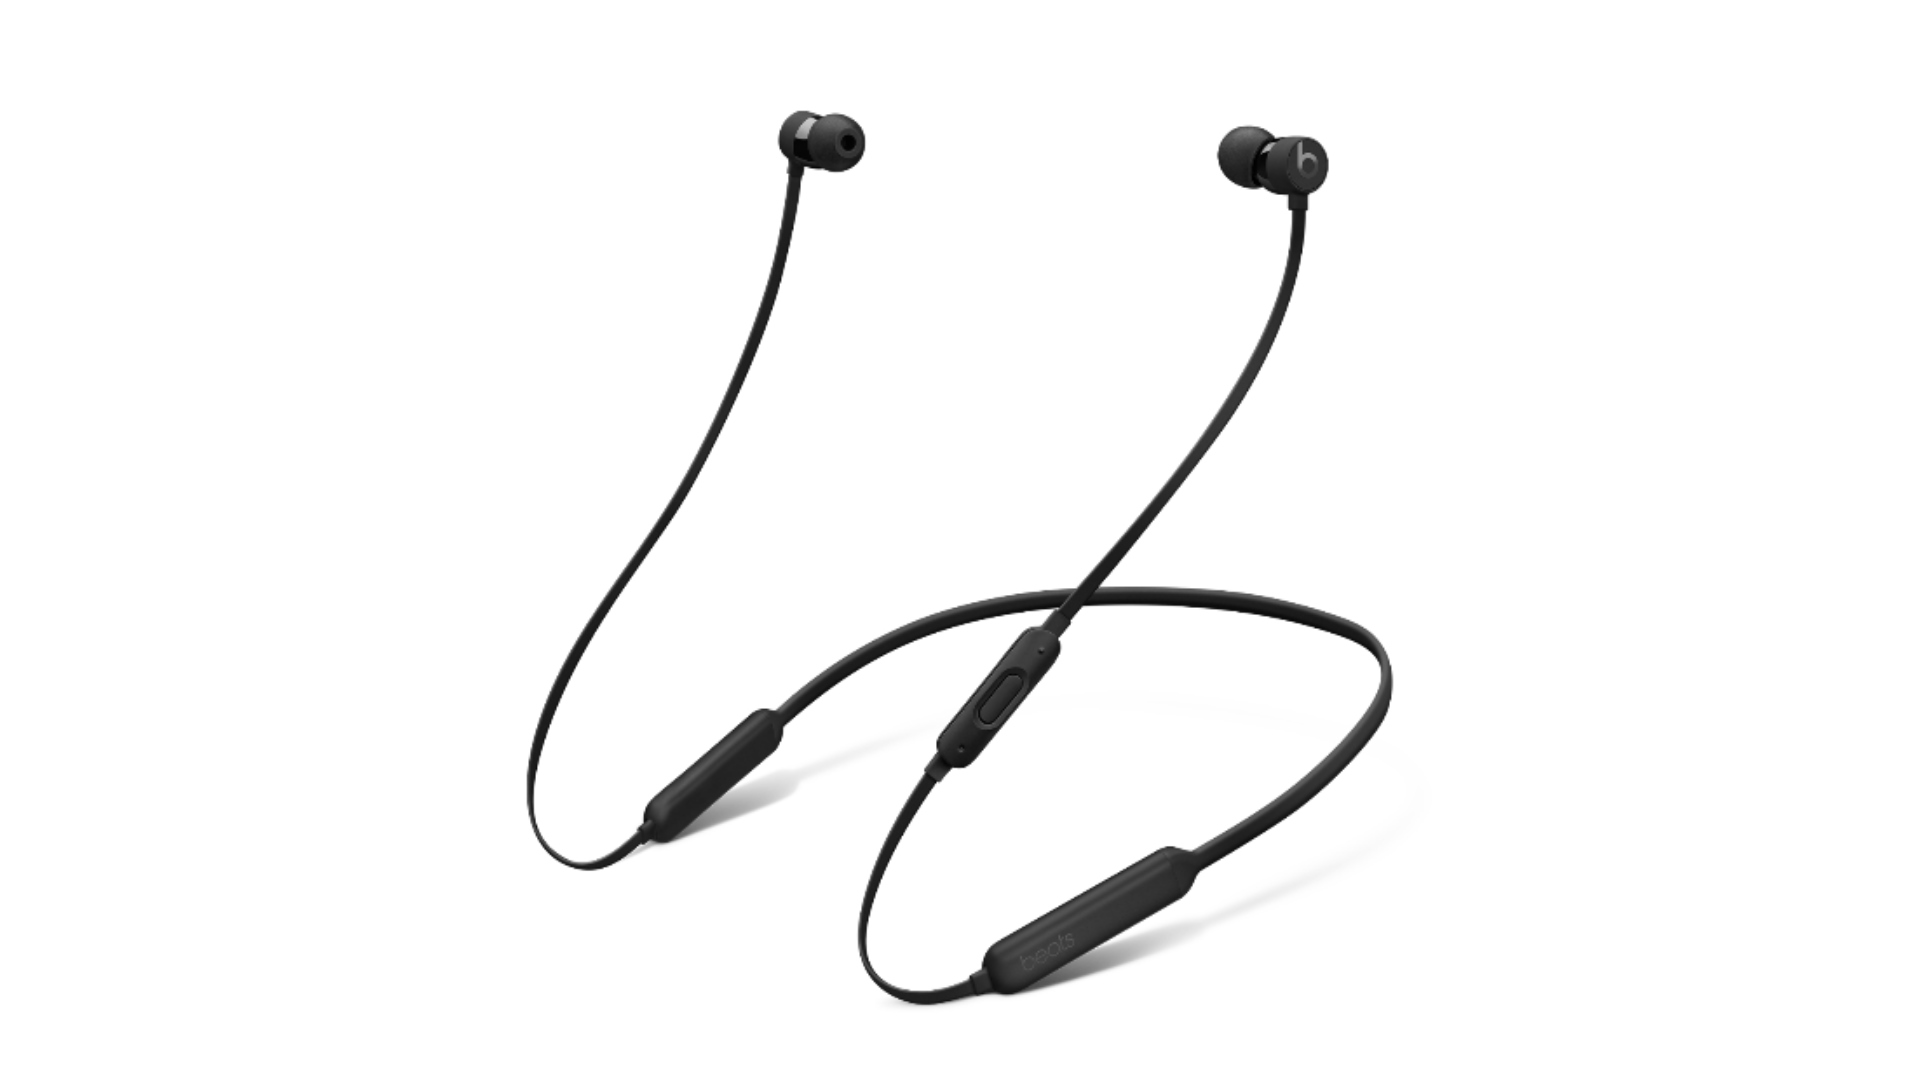 The Beats X were the first in-ear wireless headphones in the range